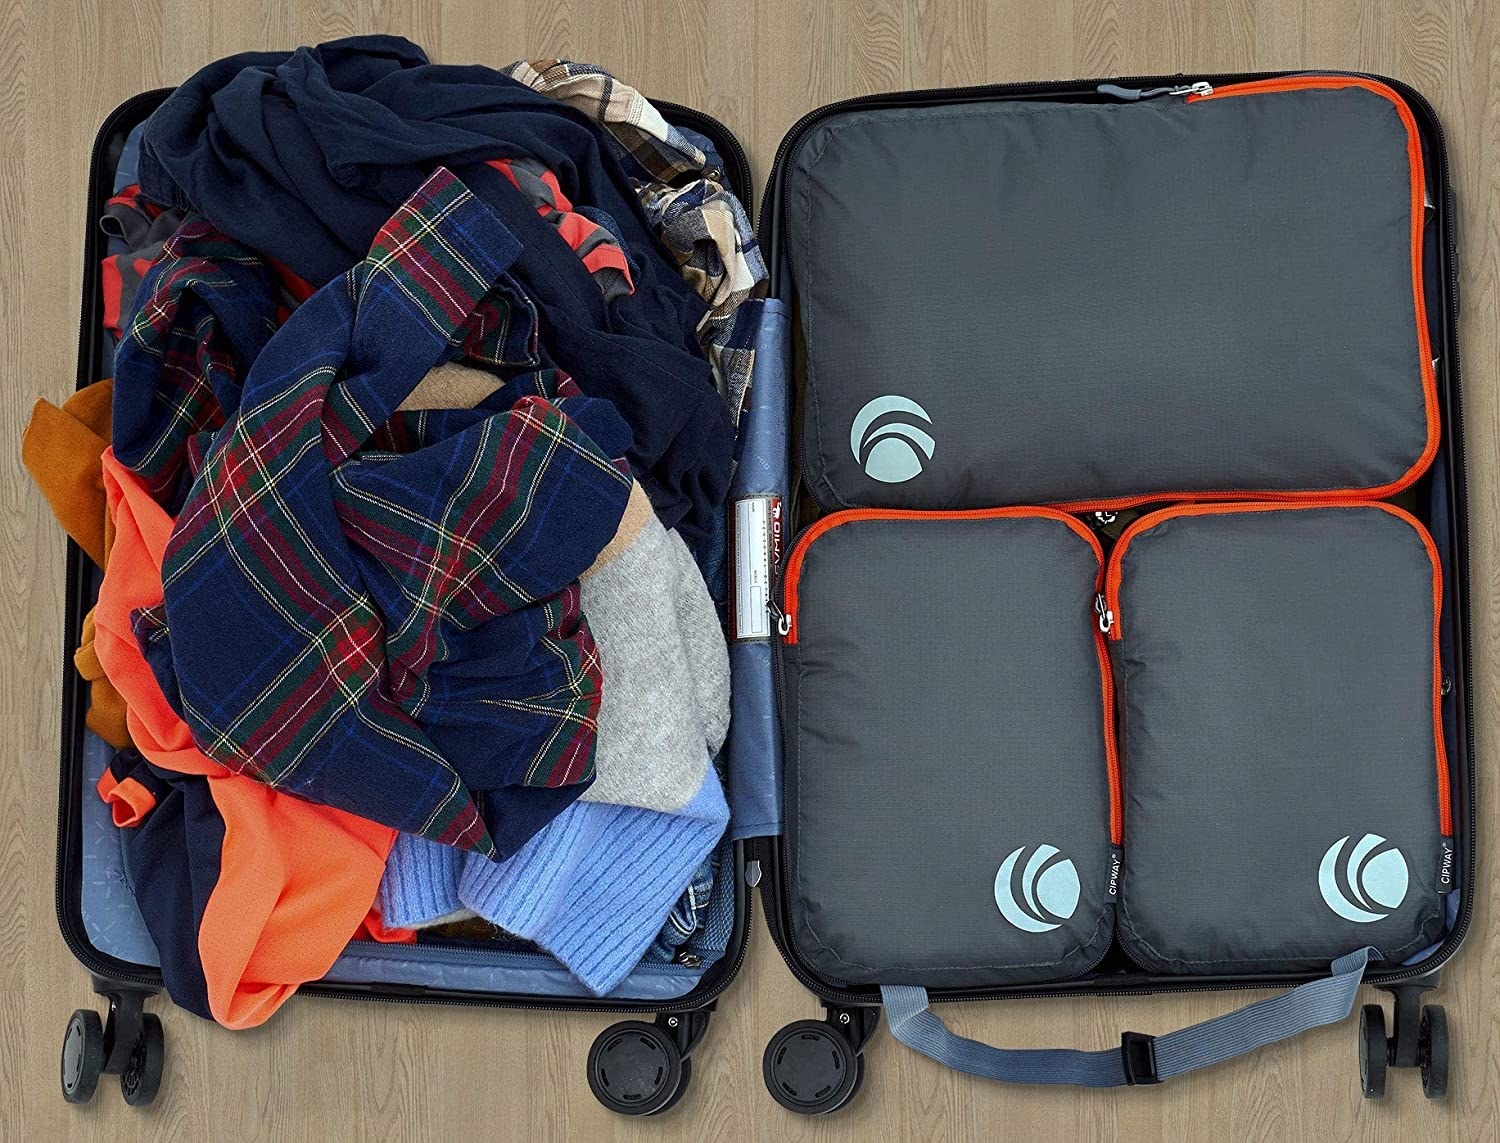 three packing cubes in a stuffed luggage